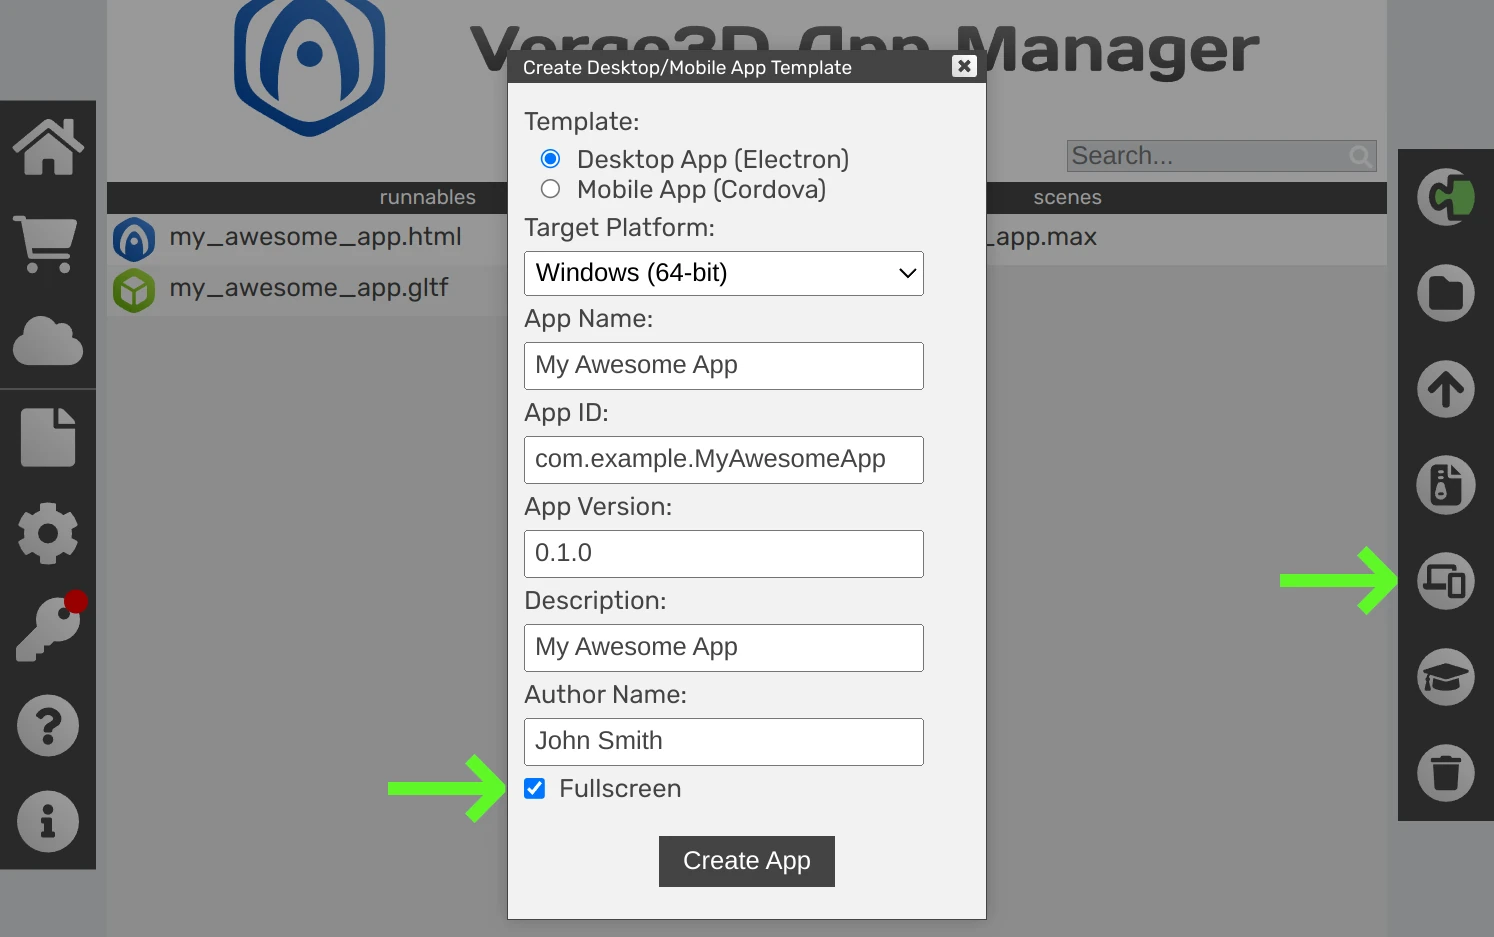 Verge3D-3ds Max: App Manager - create desktop app with electron